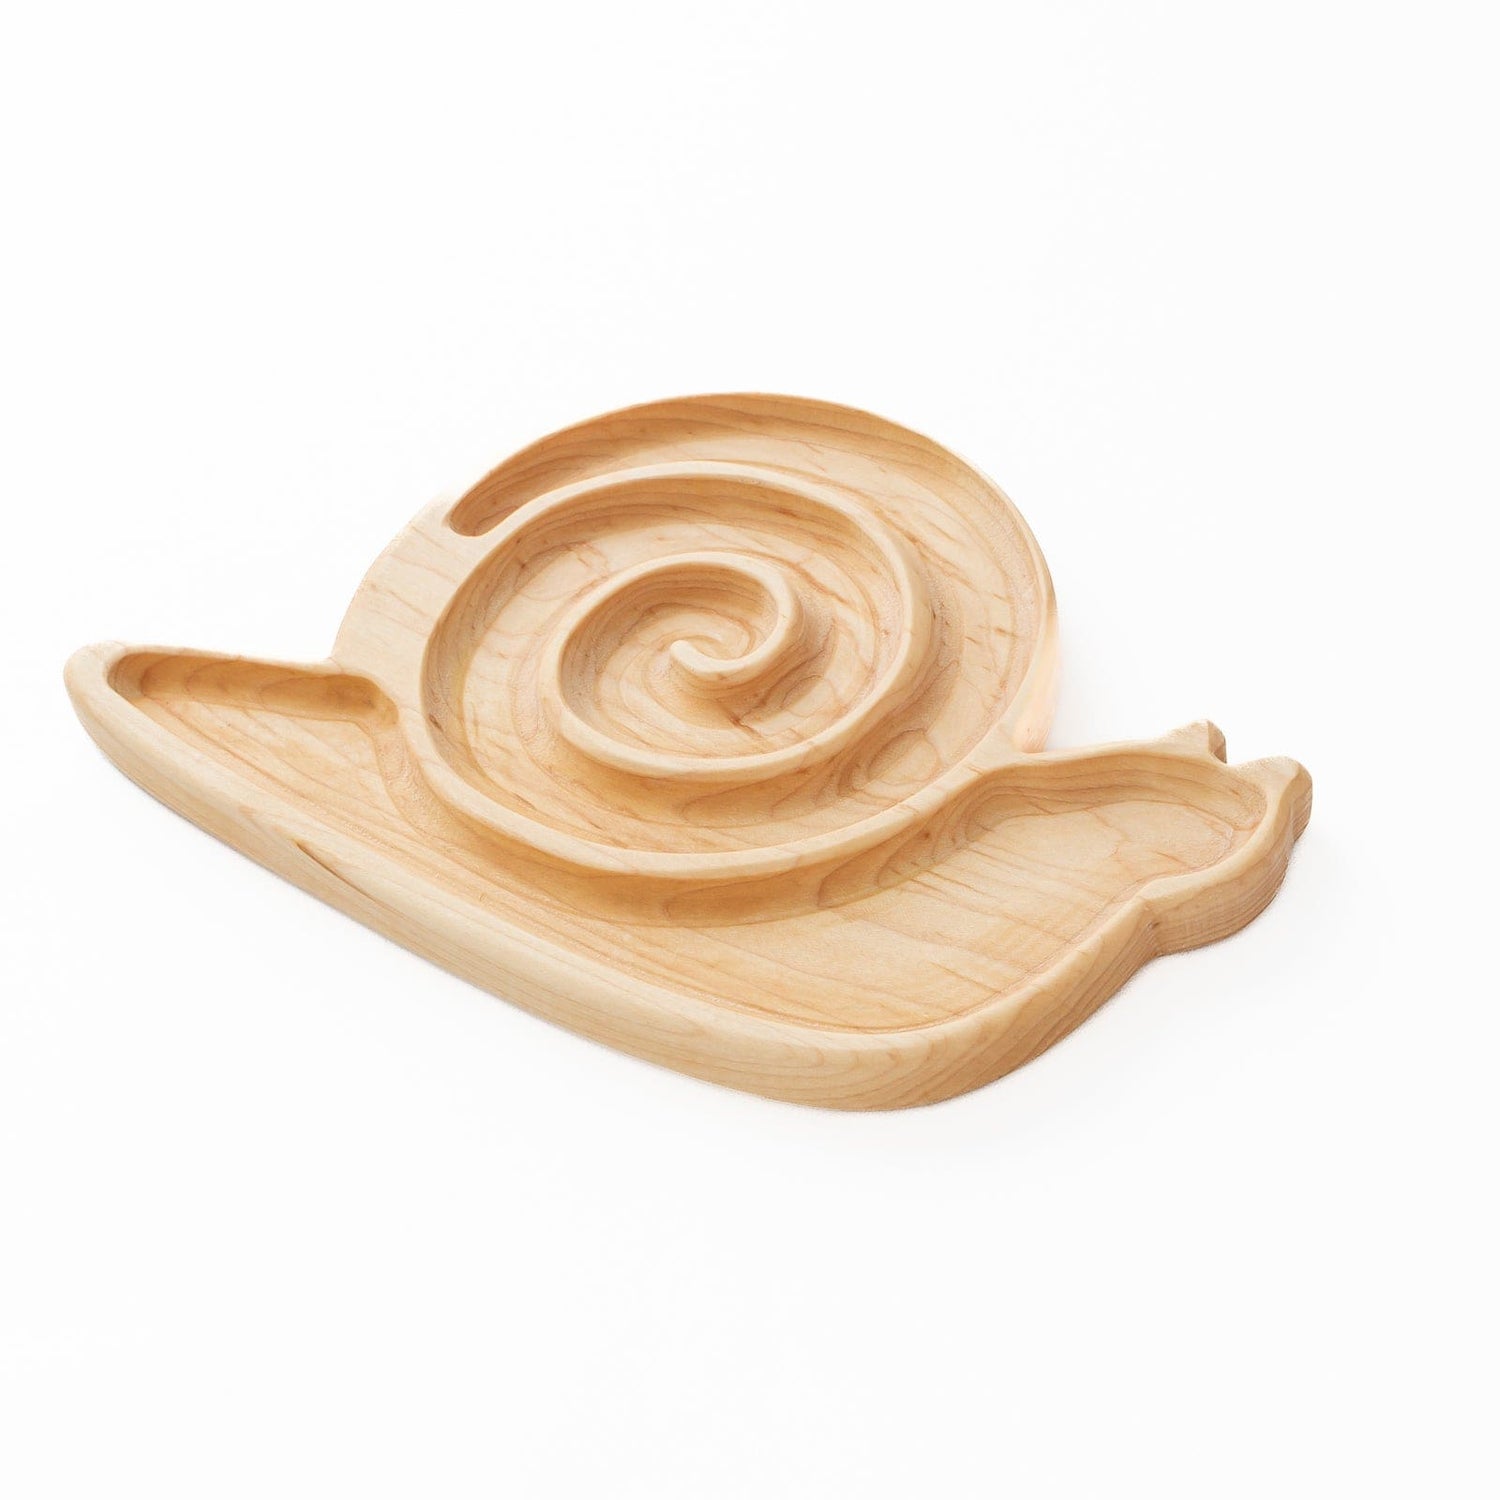 Aw & Co. Sensory Play Wooden Snail Plate / Sensory Tray (Made in Canada)